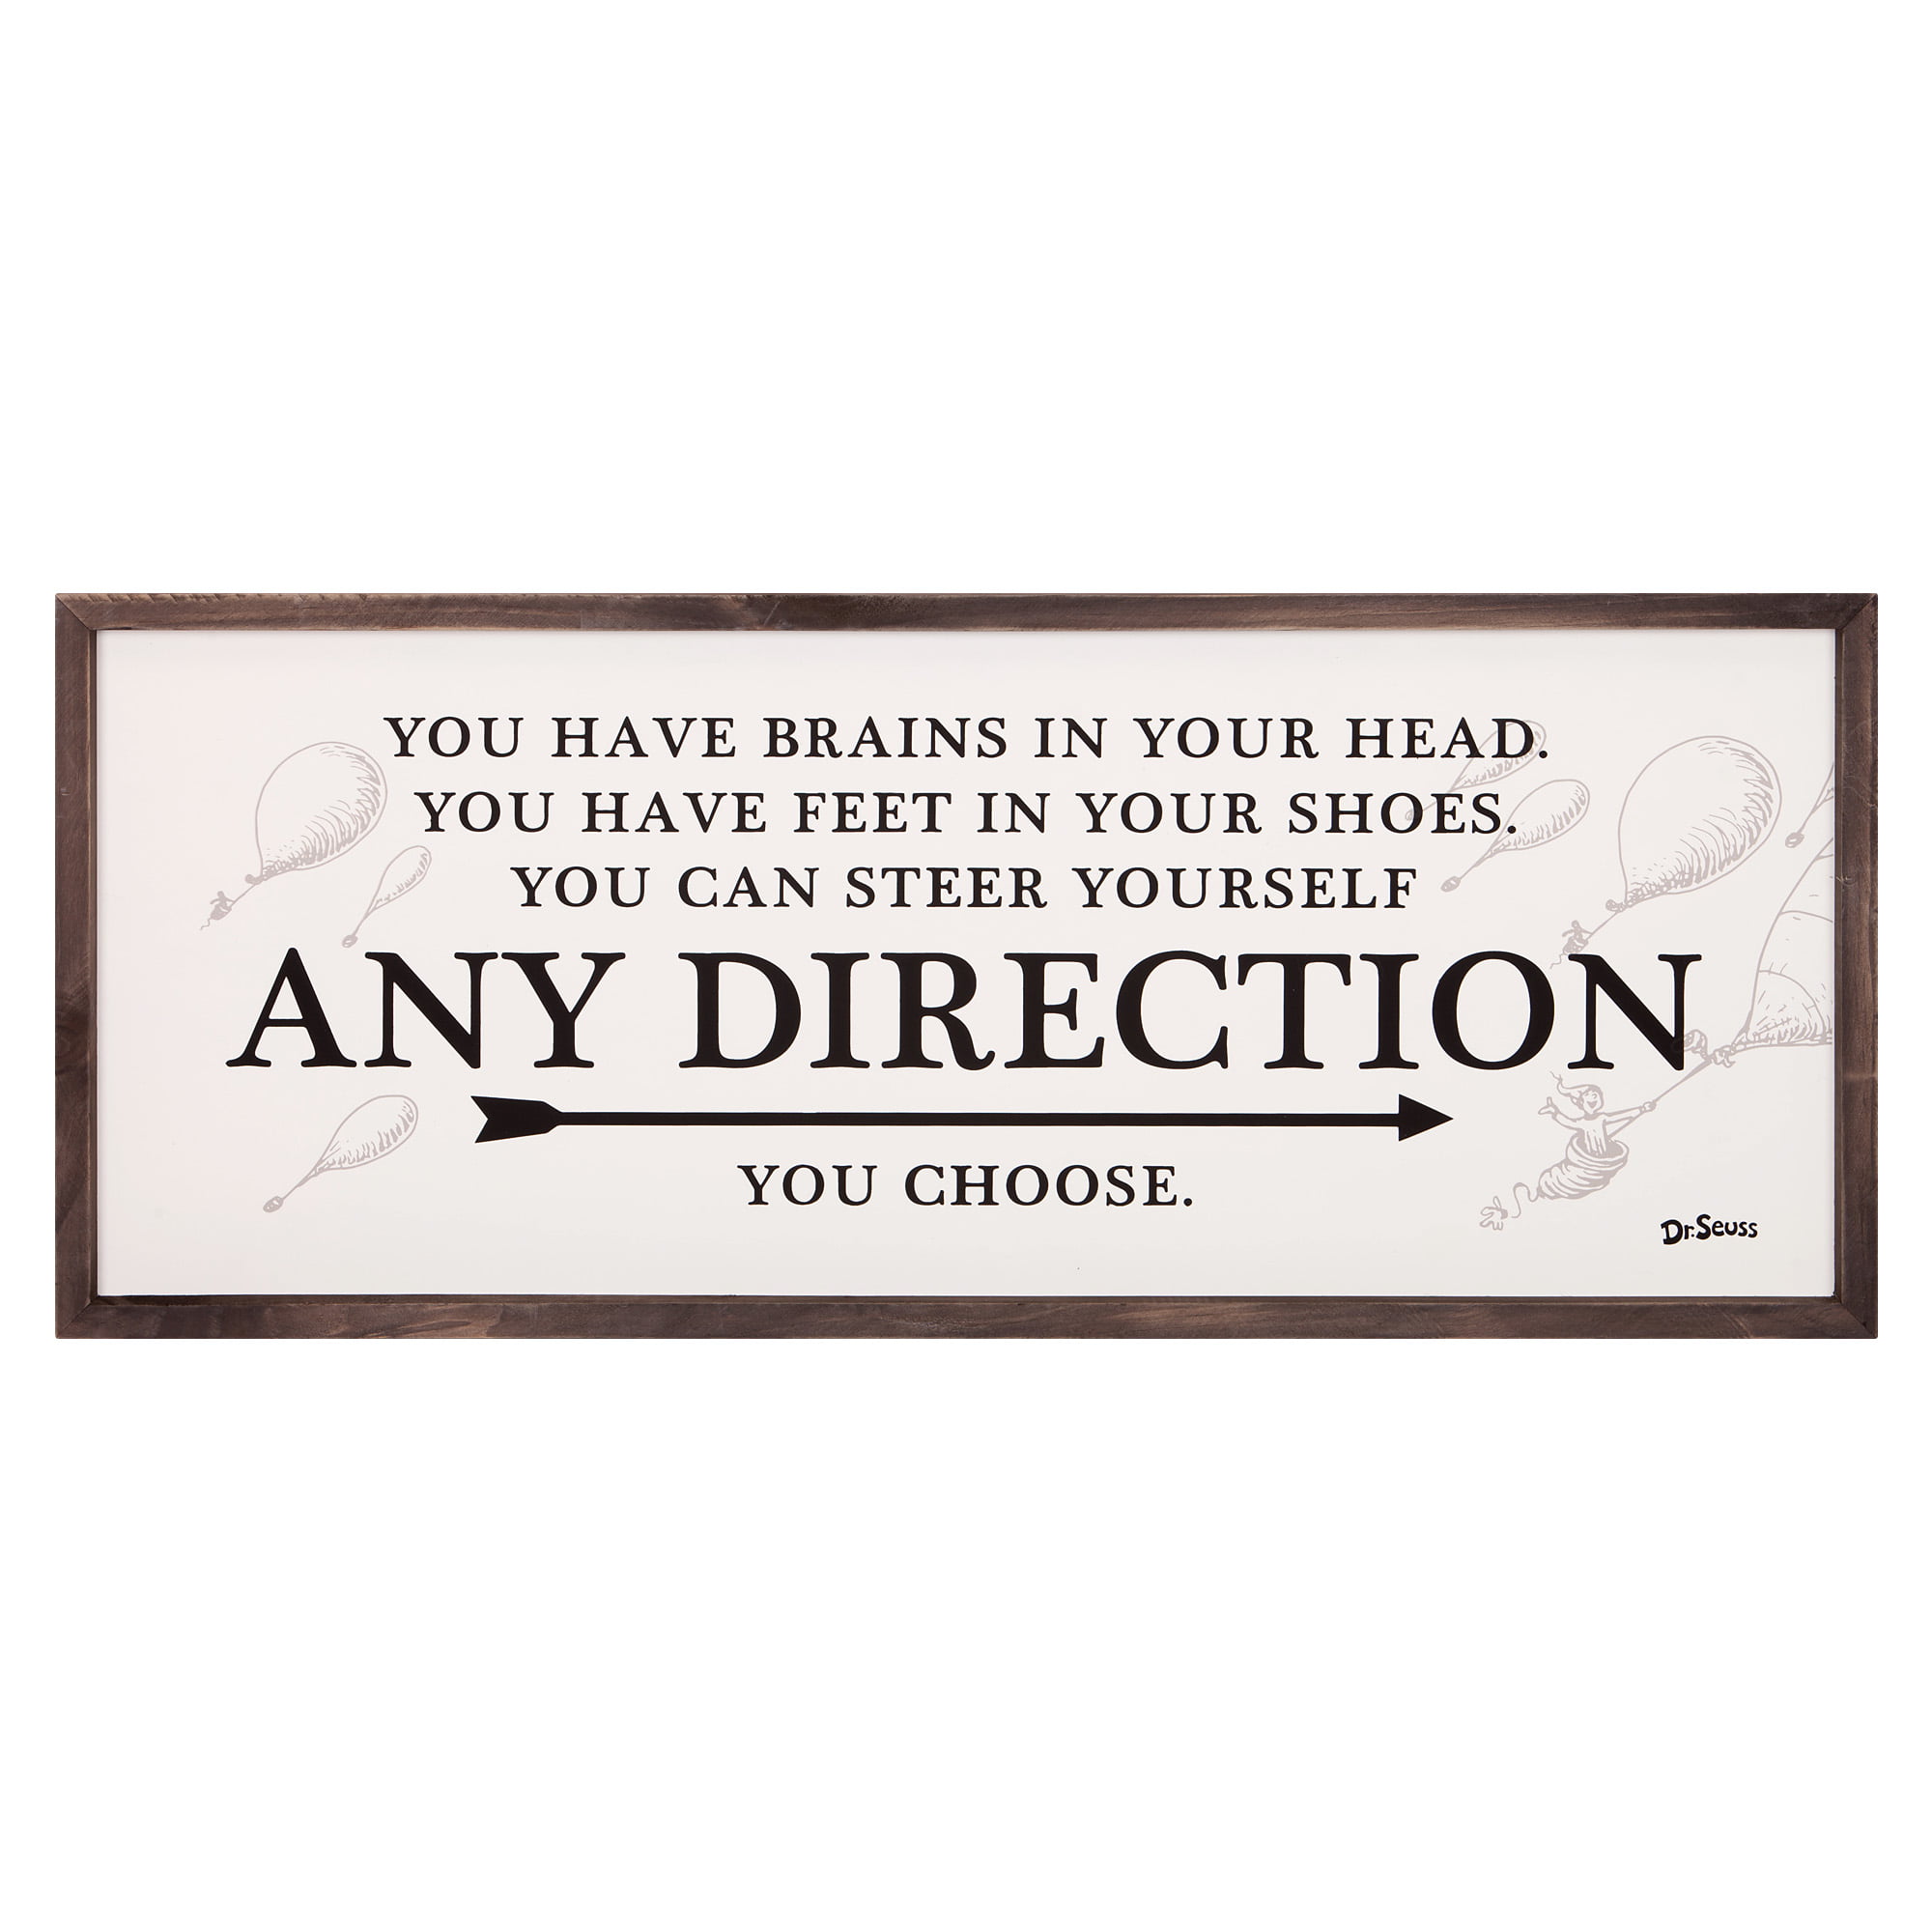 Patton Wall Decor 31x13 Dr Seuss Any Direction You Choose Framed Wood Wall Decor White